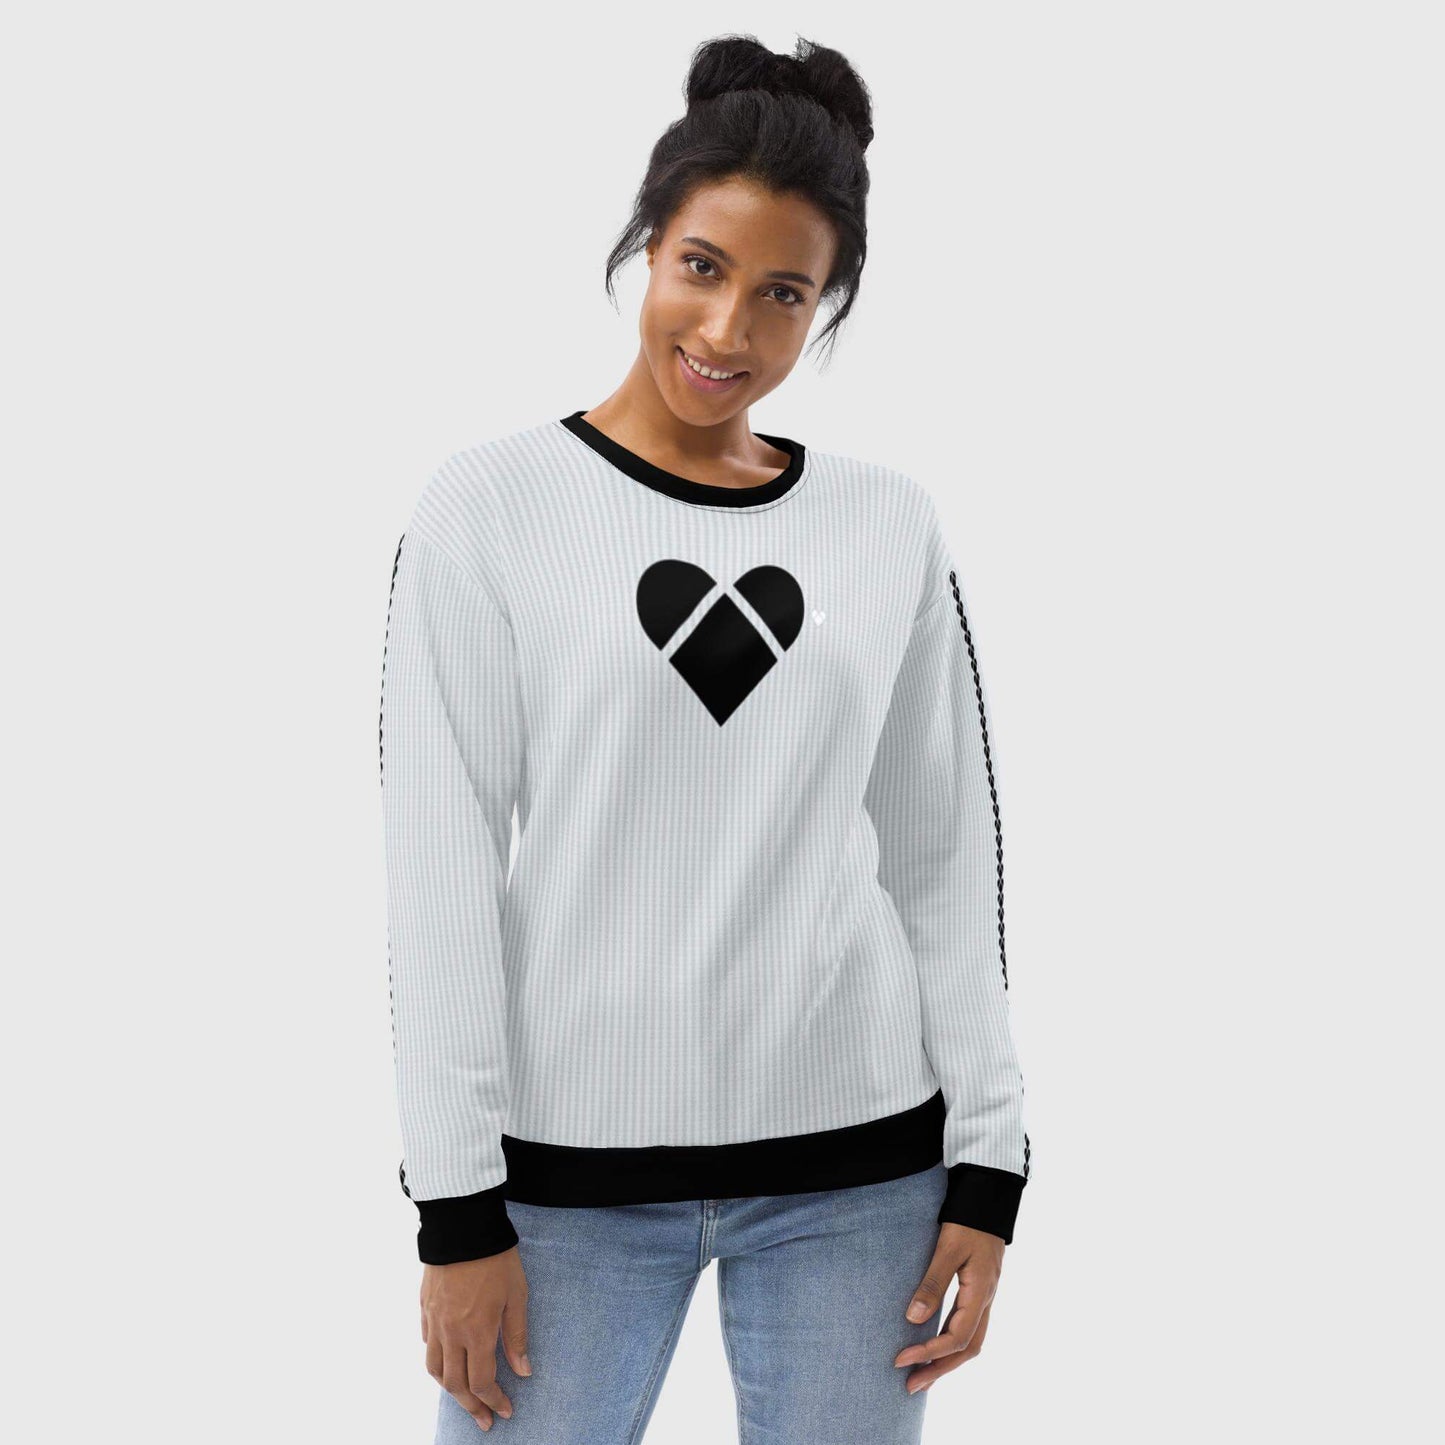 female model wearing Inclusive and versatile Light Gray Sweatshirt with Black Heart by CRiZ AMOR